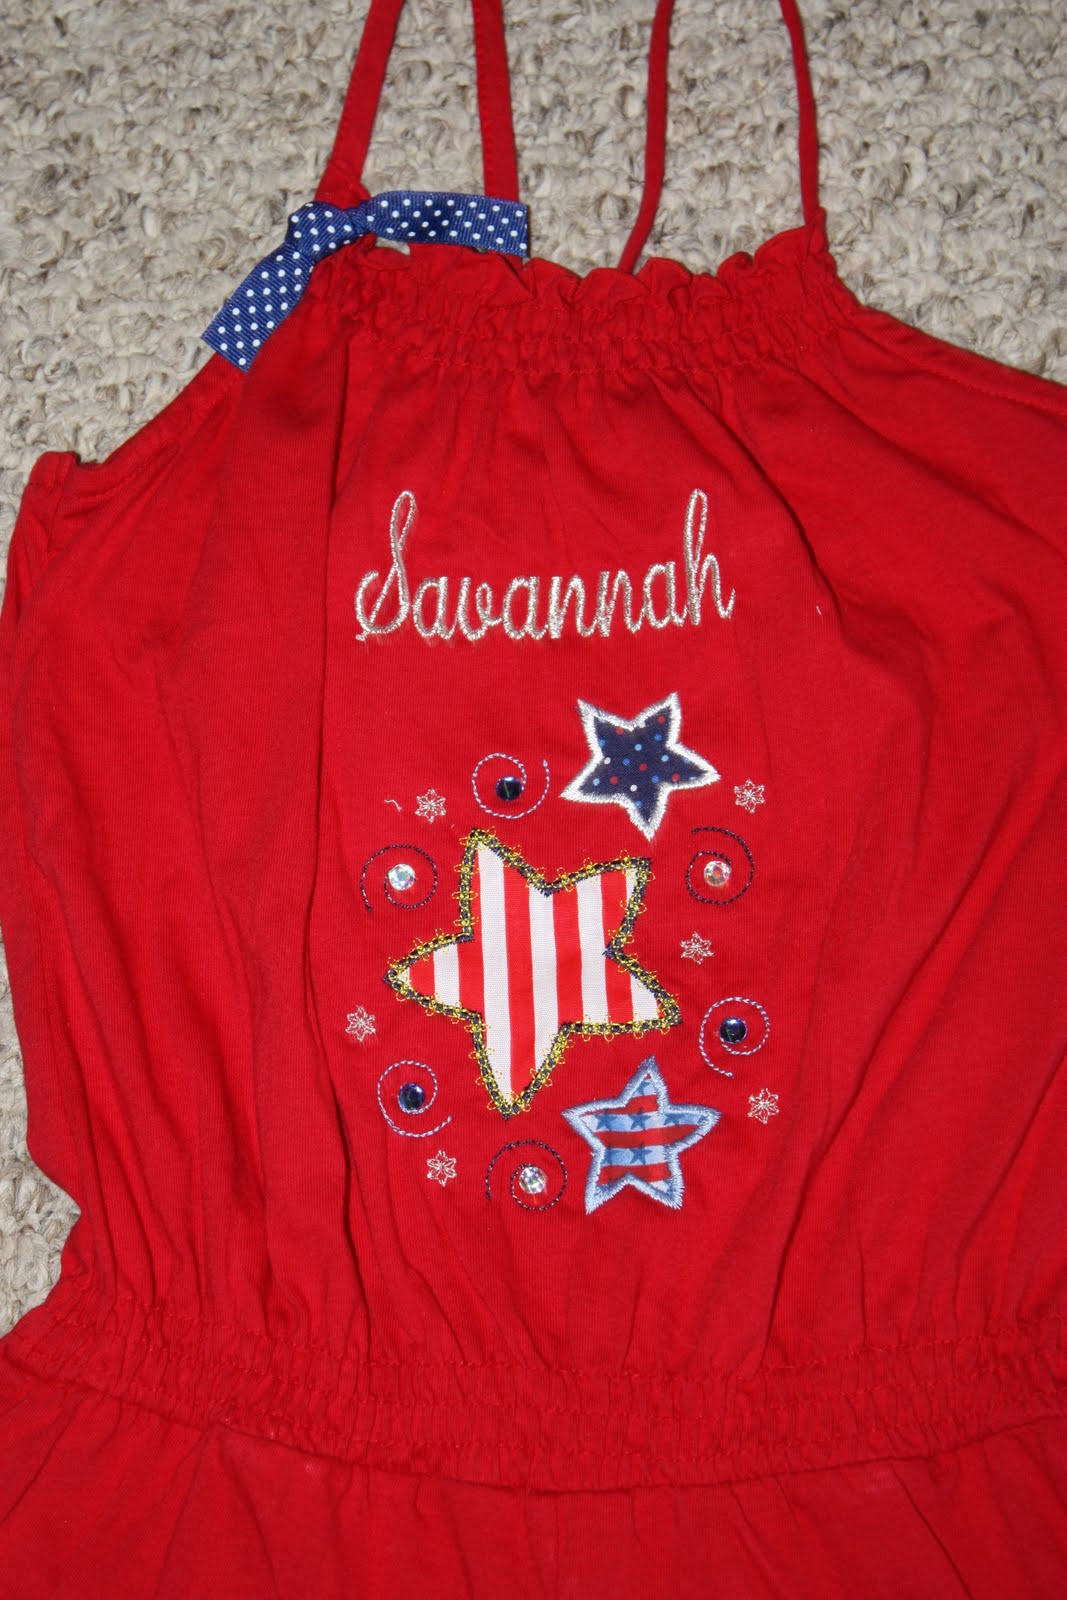 4th Of July Shirt Ideas
 Just So Cute Designs 4th of July Shirts